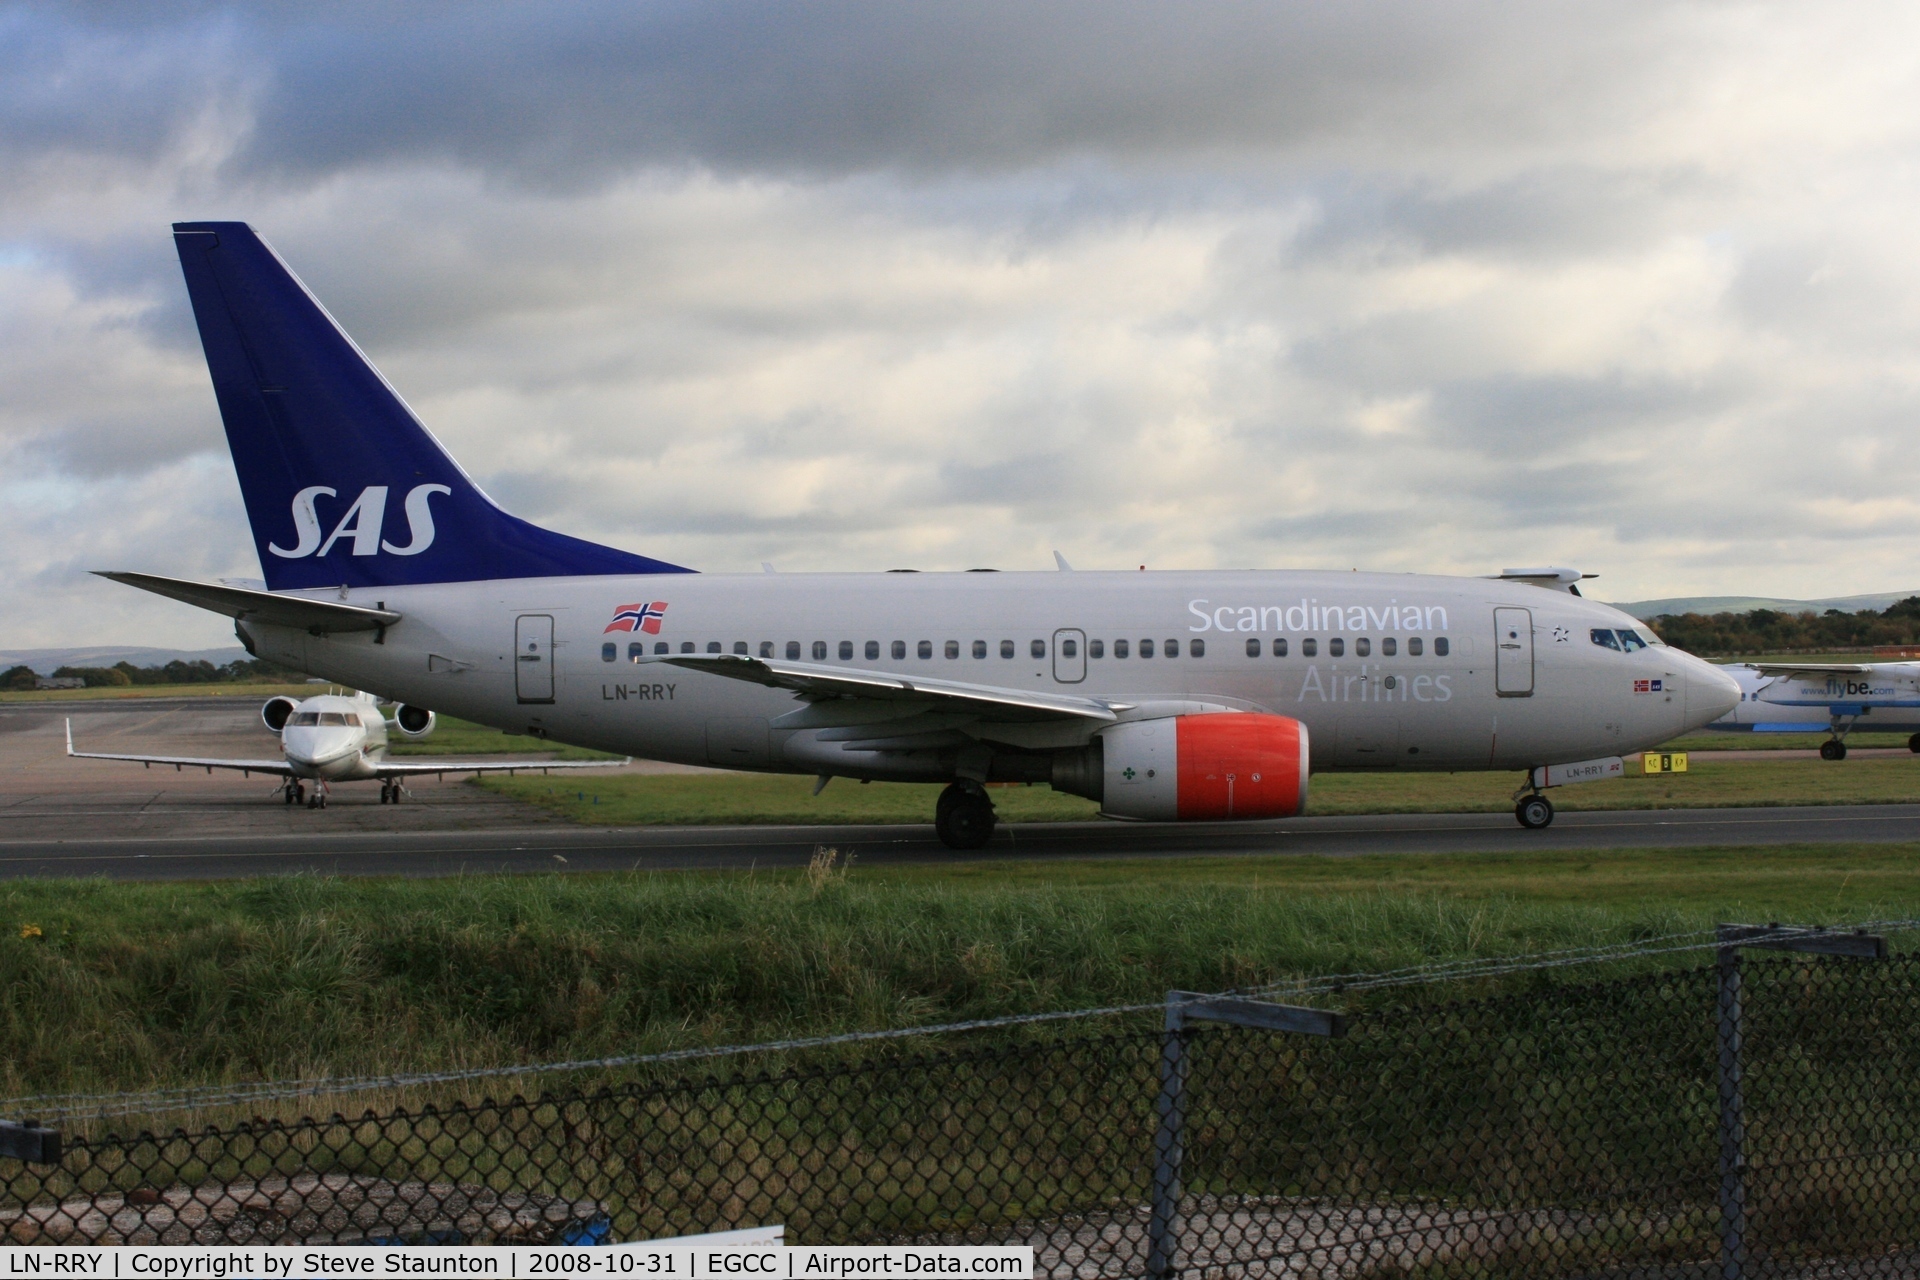 LN-RRY, 1998 Boeing 737-683 C/N 28297, Taken at Manchester Airport, October 2008